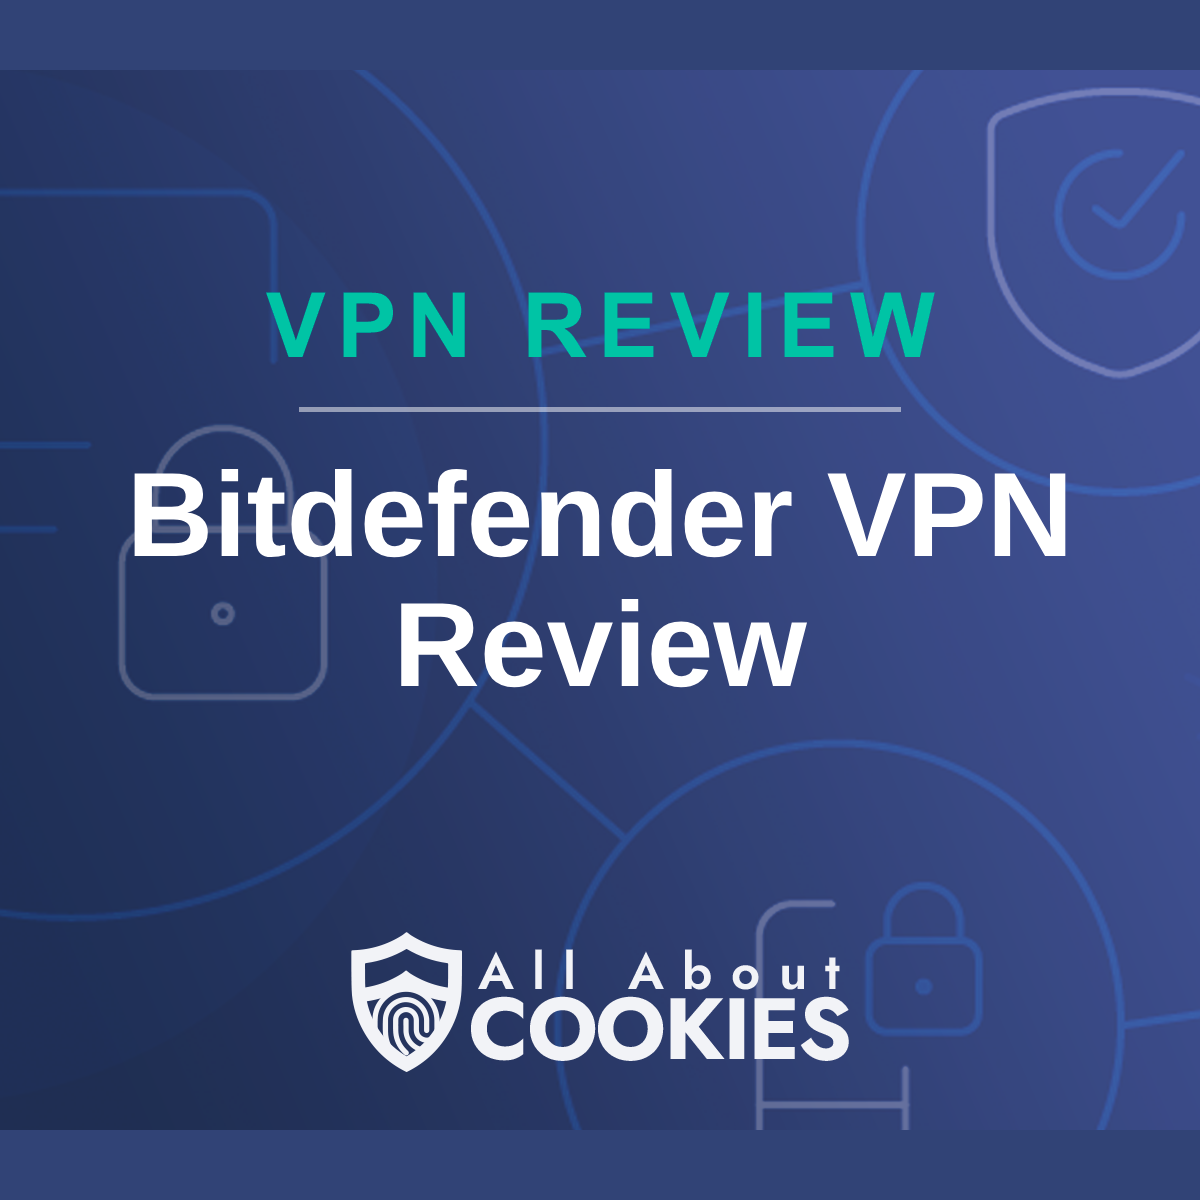 Blue background with text reading &quot;VPN Review Bitdefender VPN Review&quot; and All About Cookies logo underneath.